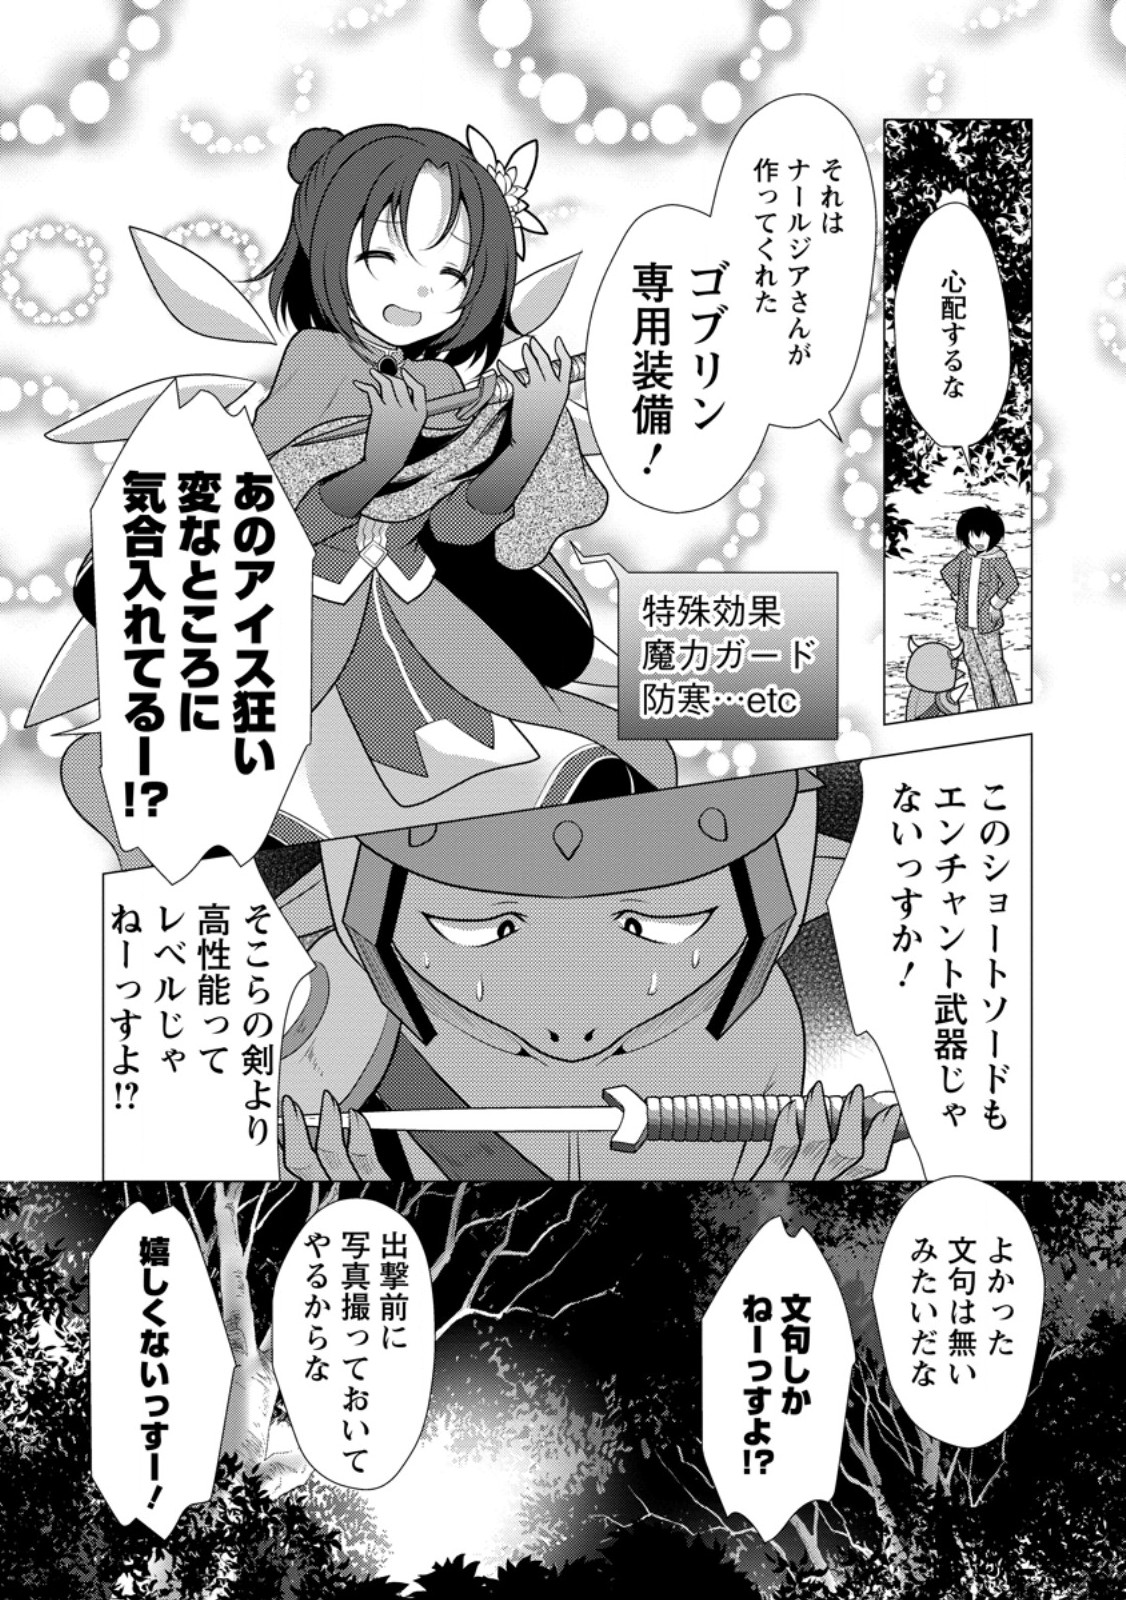 Hisshou Dungeon Unei Houhou - Chapter 60.3 - Page 1